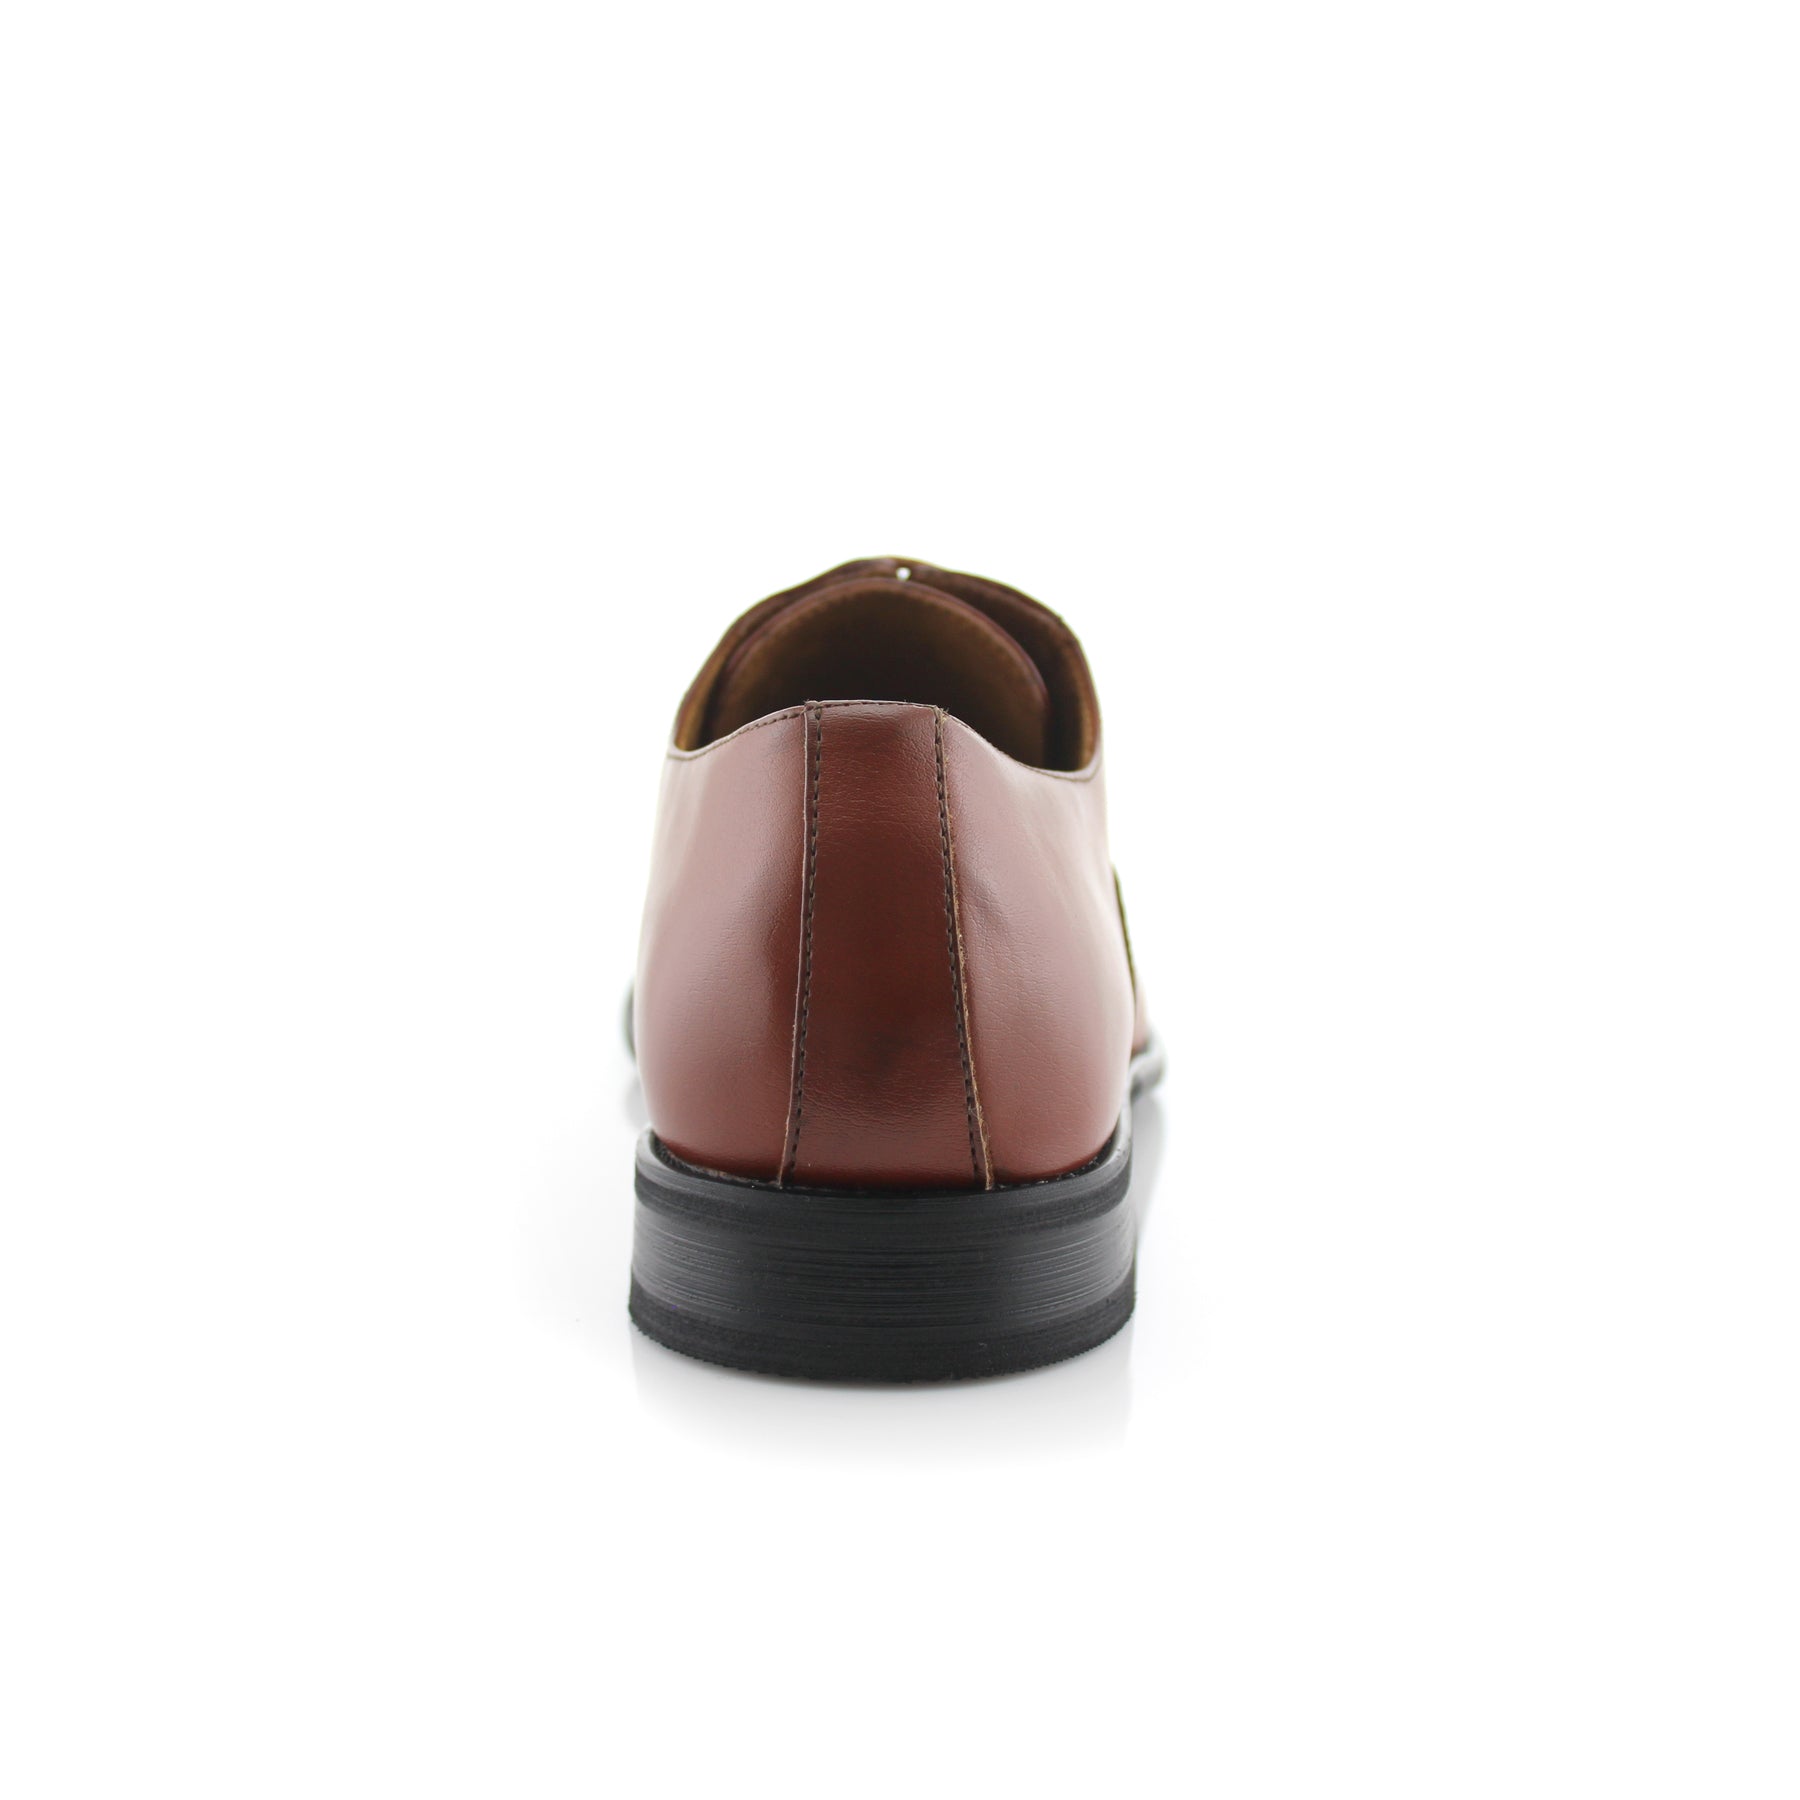 Classic Cap-Toe Oxford Dress Shoes | Charles by Ferro Aldo | Conal Footwear | Back Angle View